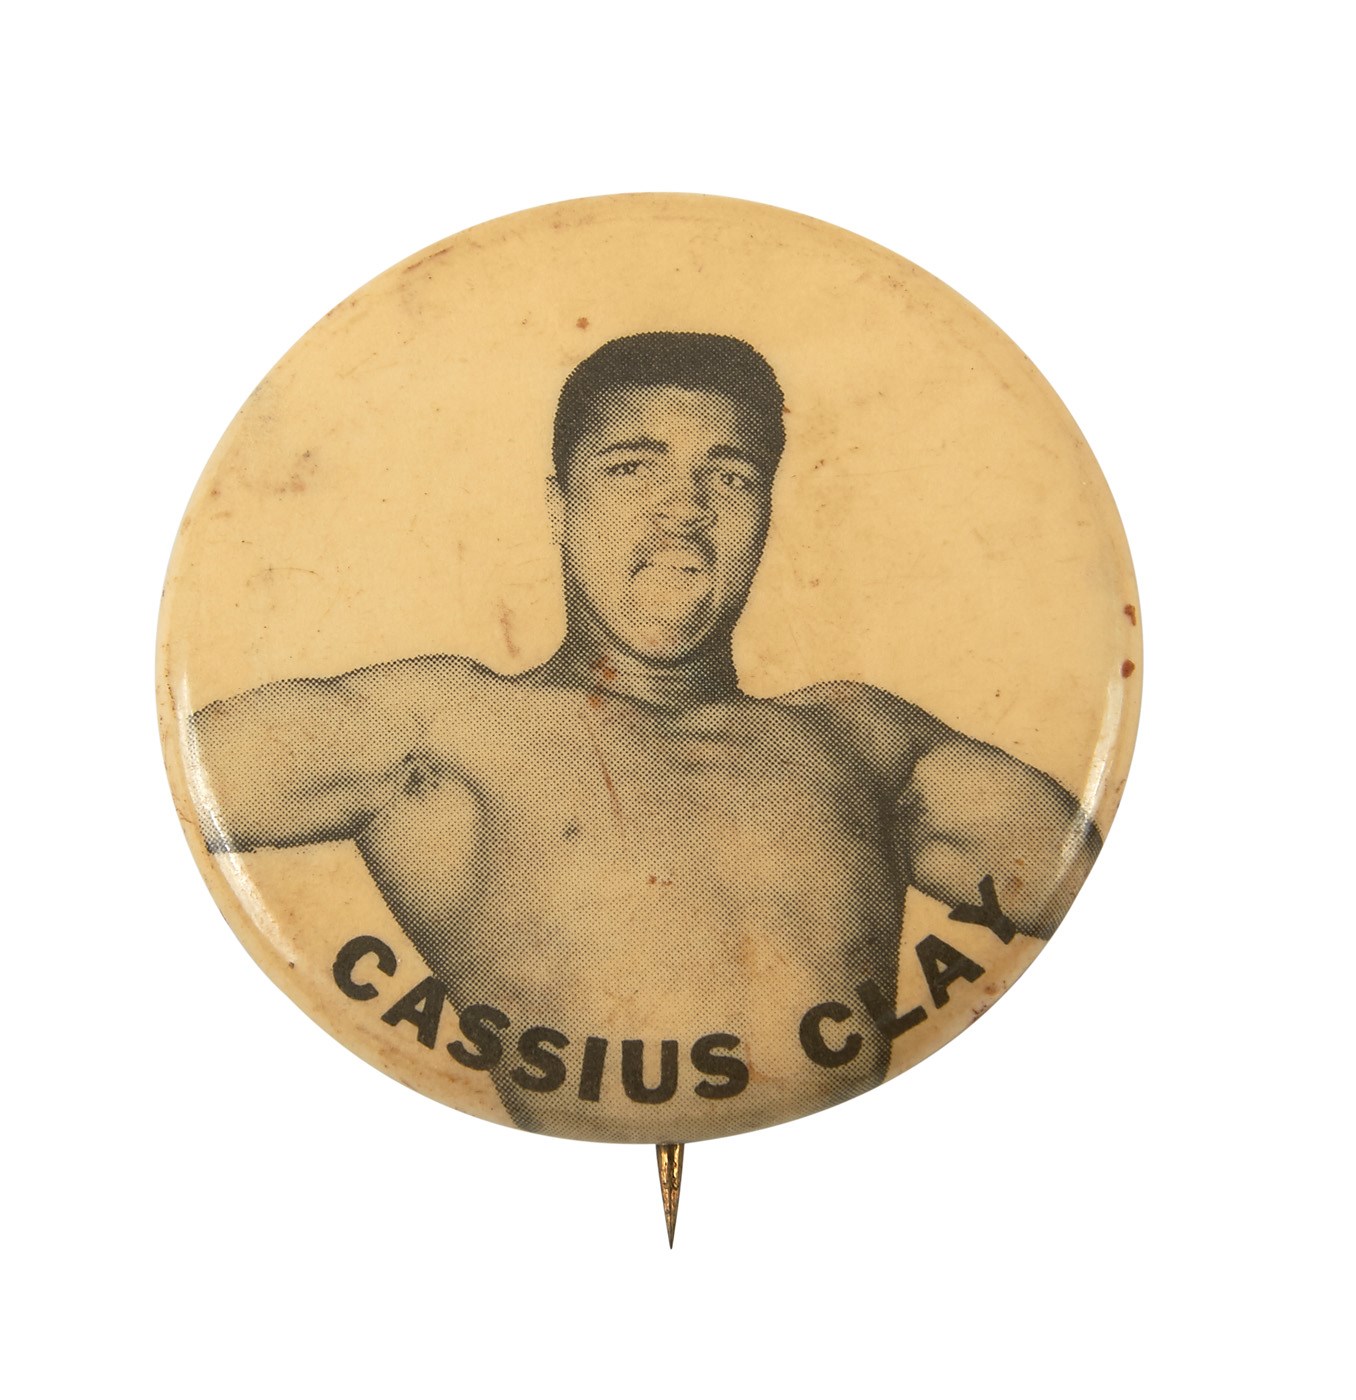 Muhammad Ali & Boxing - Cassius Clay Souvenir Pin (Early 1960s)